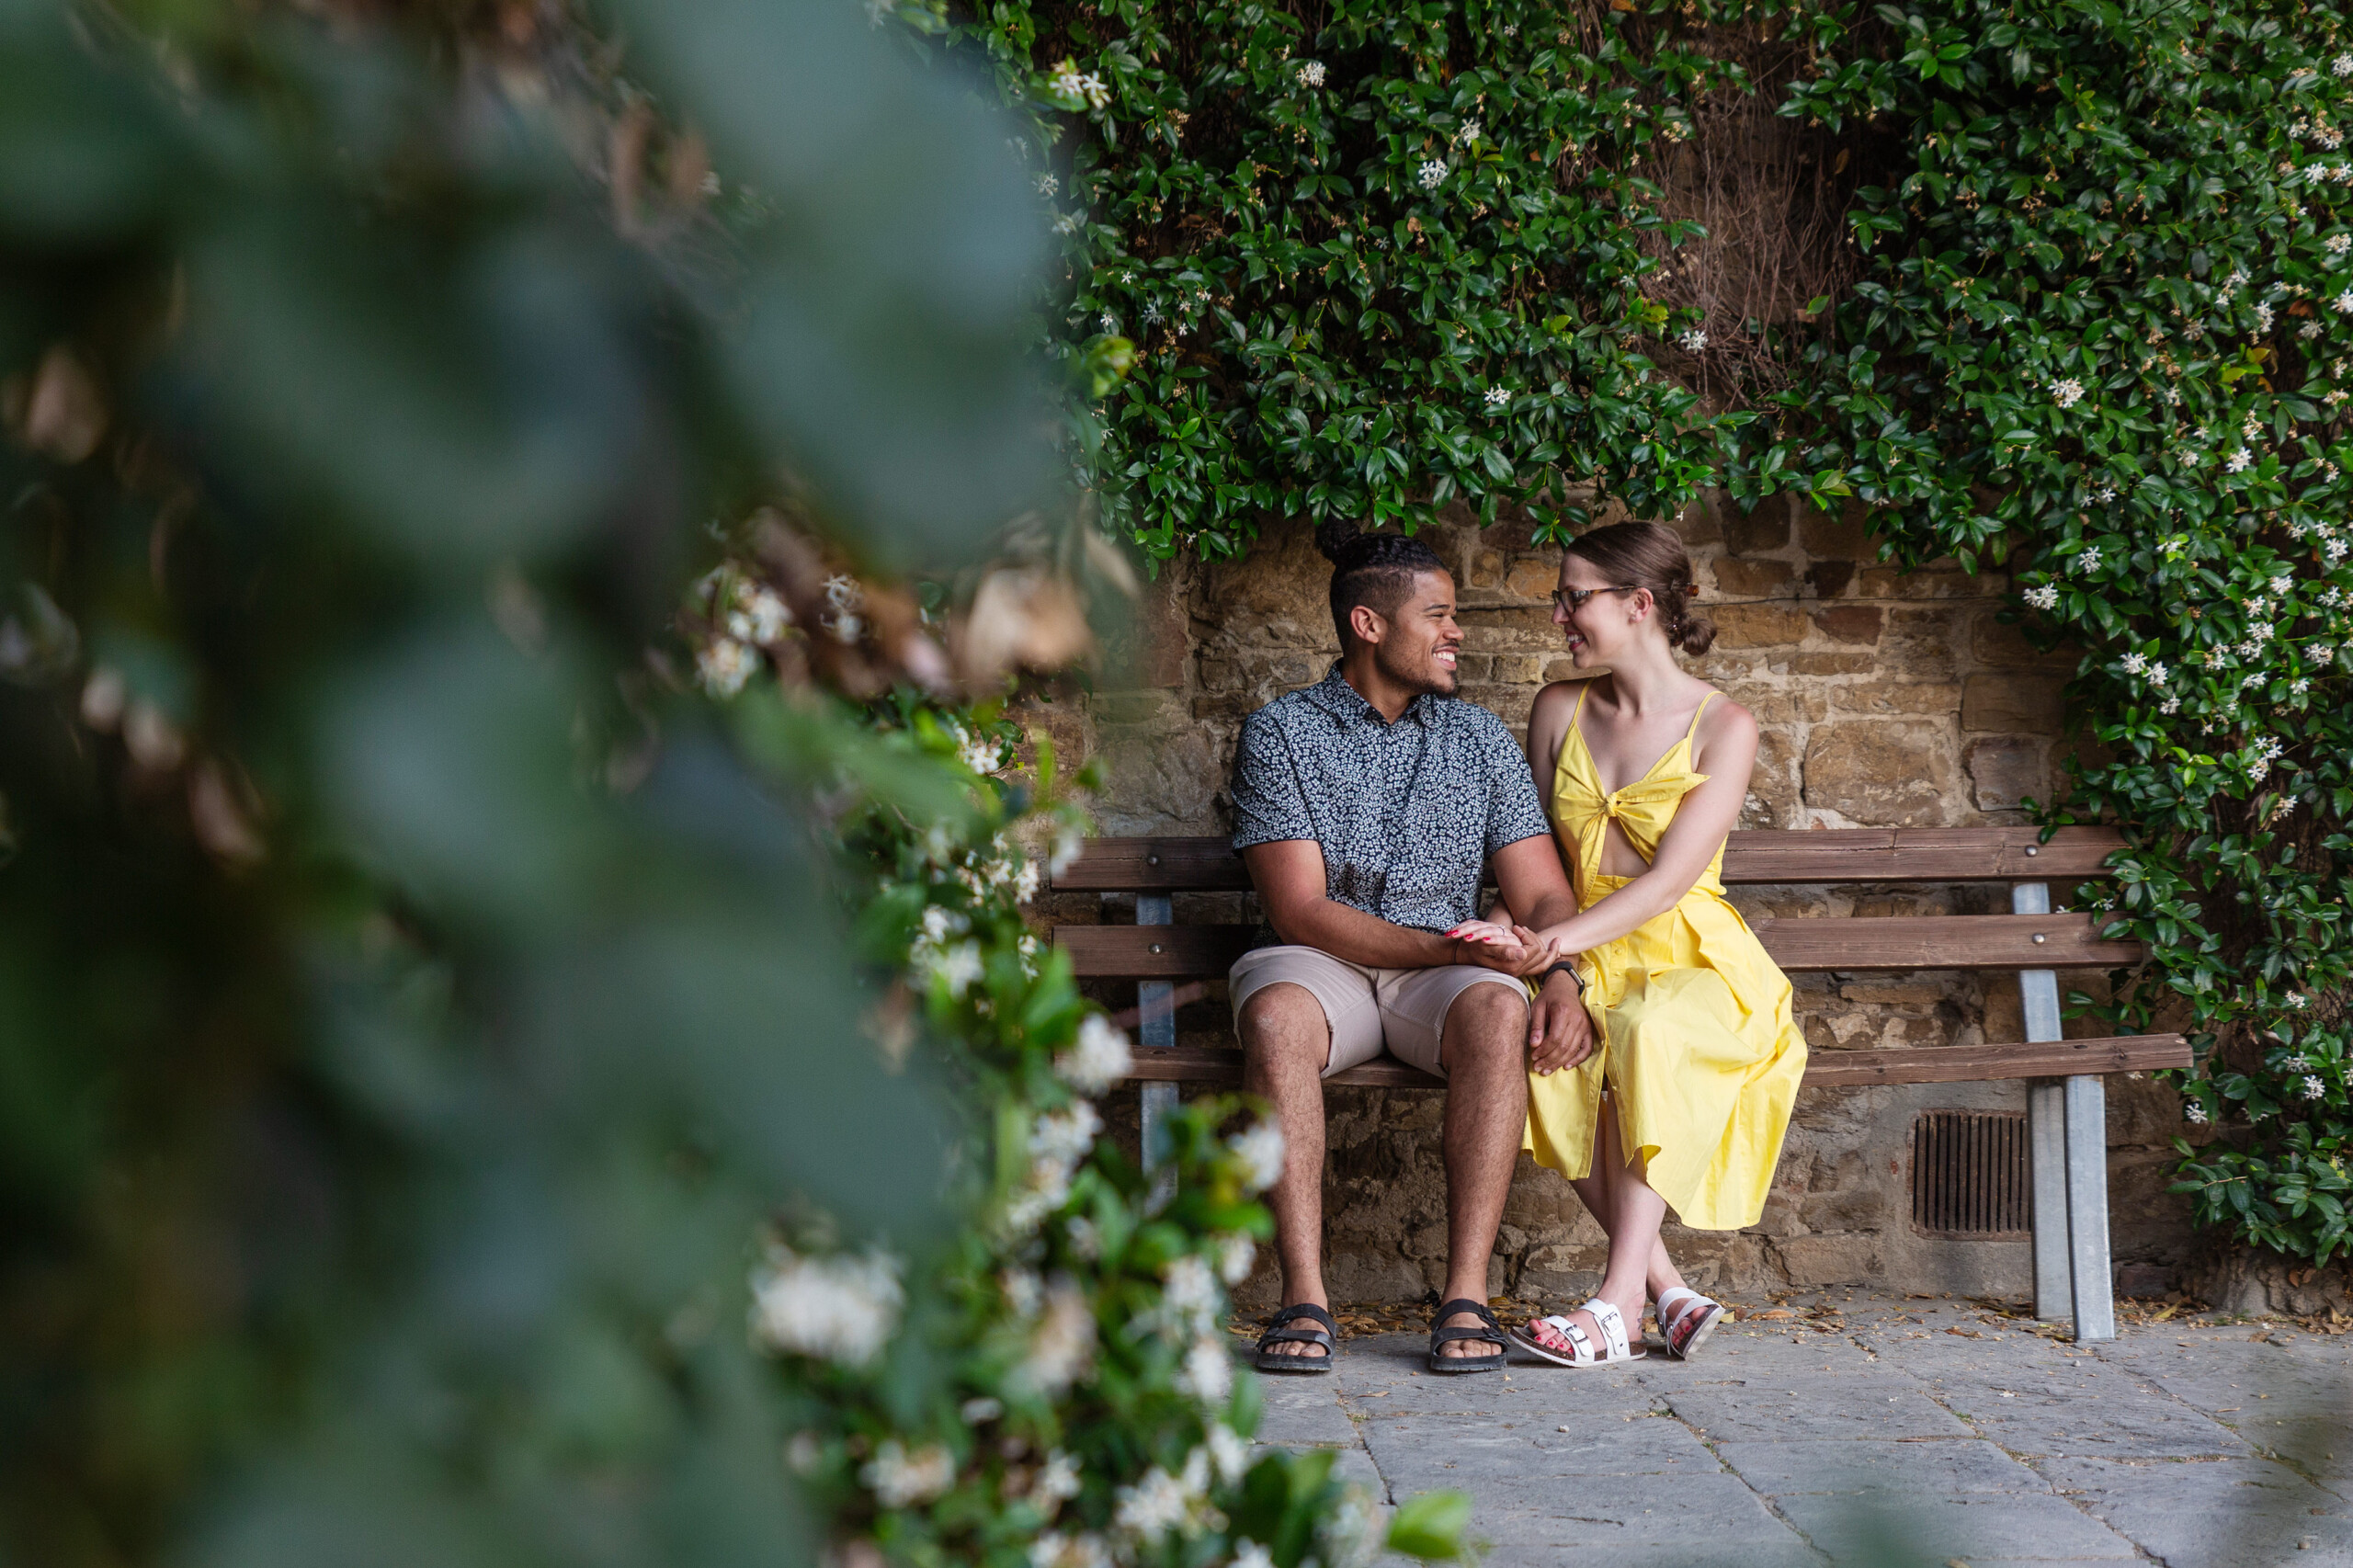 Proposal photoshoot by Dorin, Localgrapher in Florence